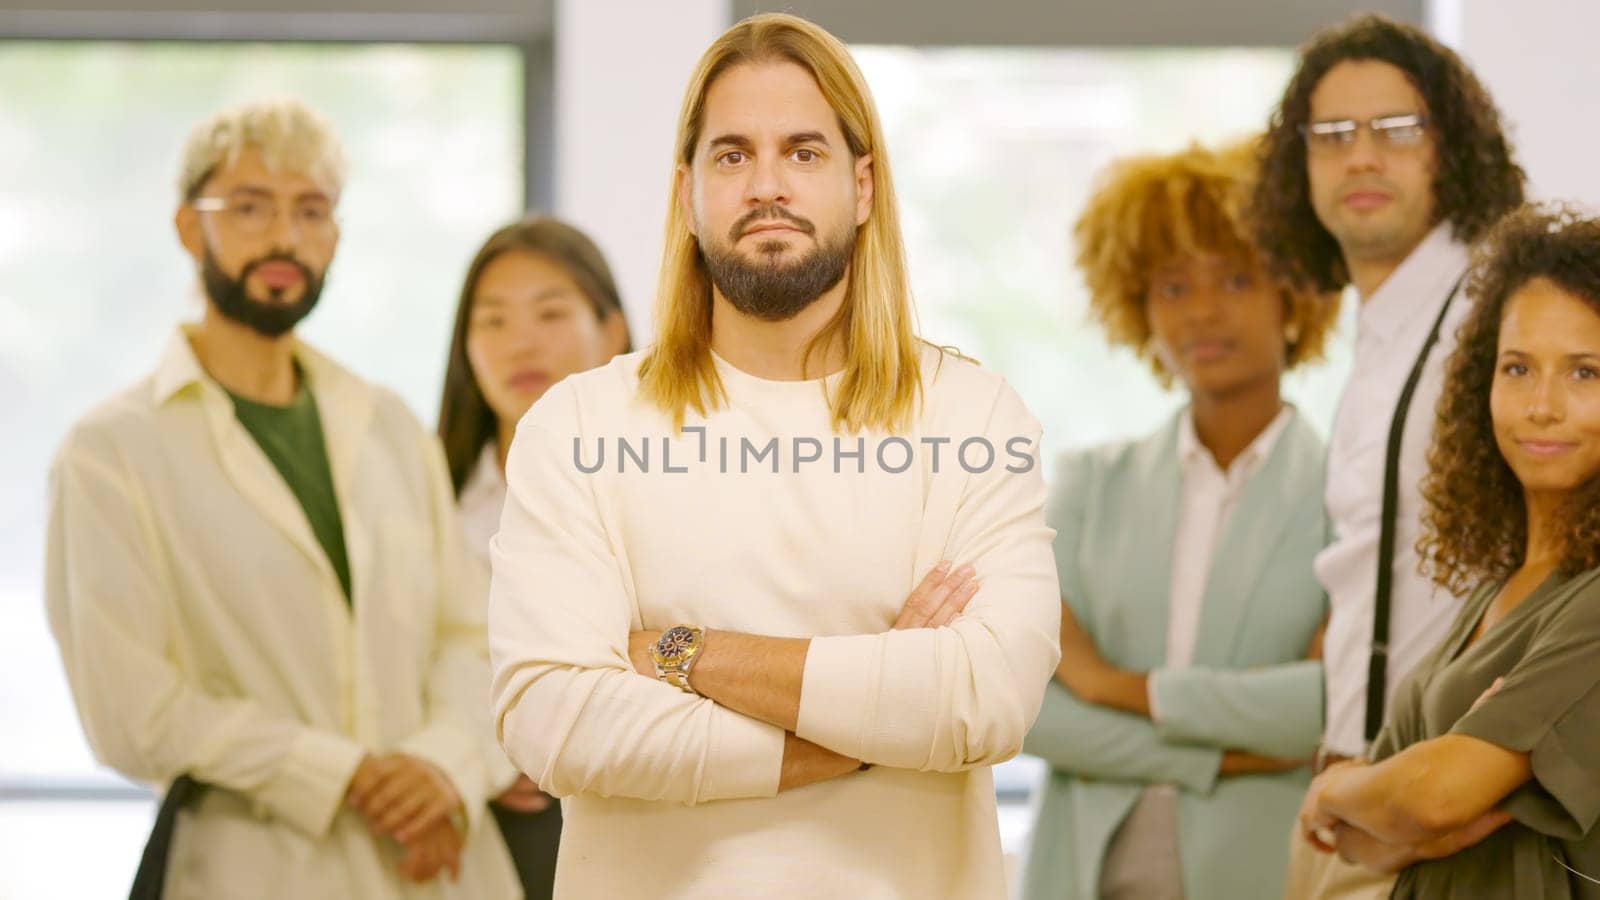 Man leading a group of coworkers standing proud in the office